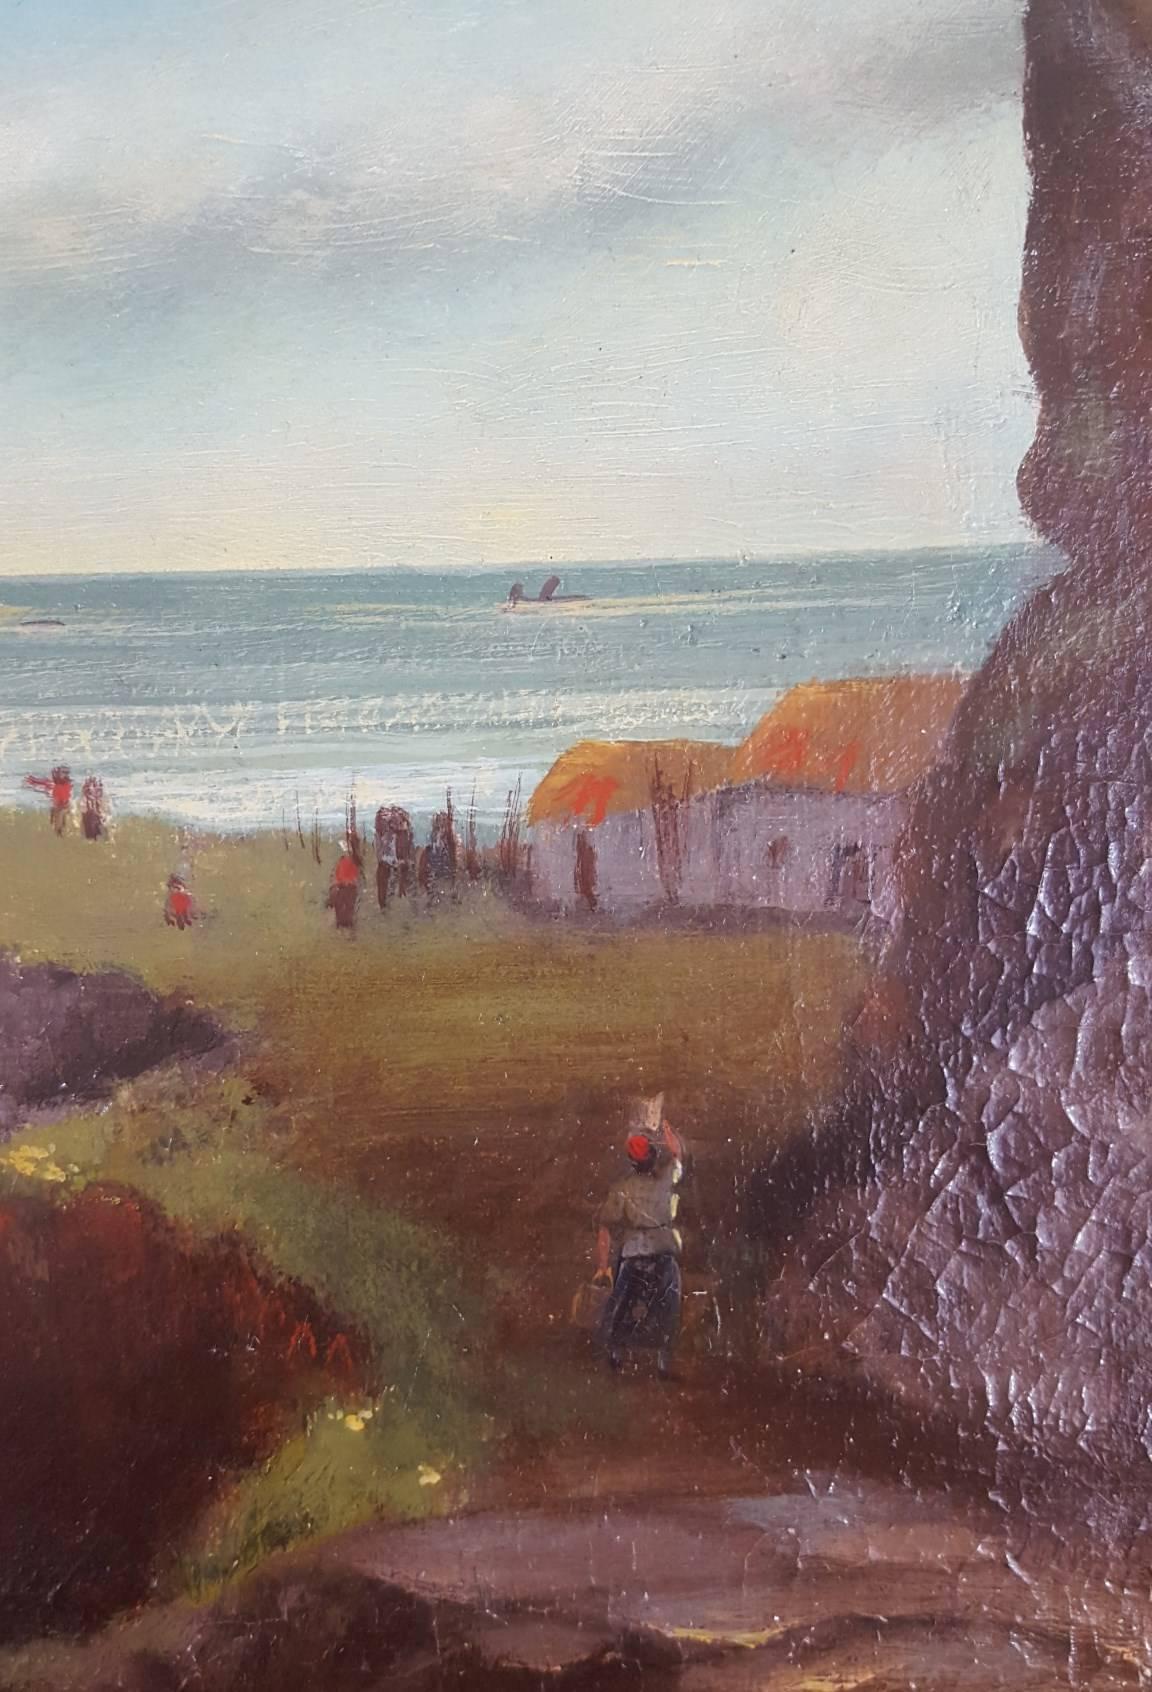 An original signed oil on canvas by English artist Millson Hunt (fl. 1875-1900) titled "Lulsworth Cove, Dorset". Signed and dated lower right: "Millson Hunt 1885". This oil on canvas has been professionally restored. Framed size: